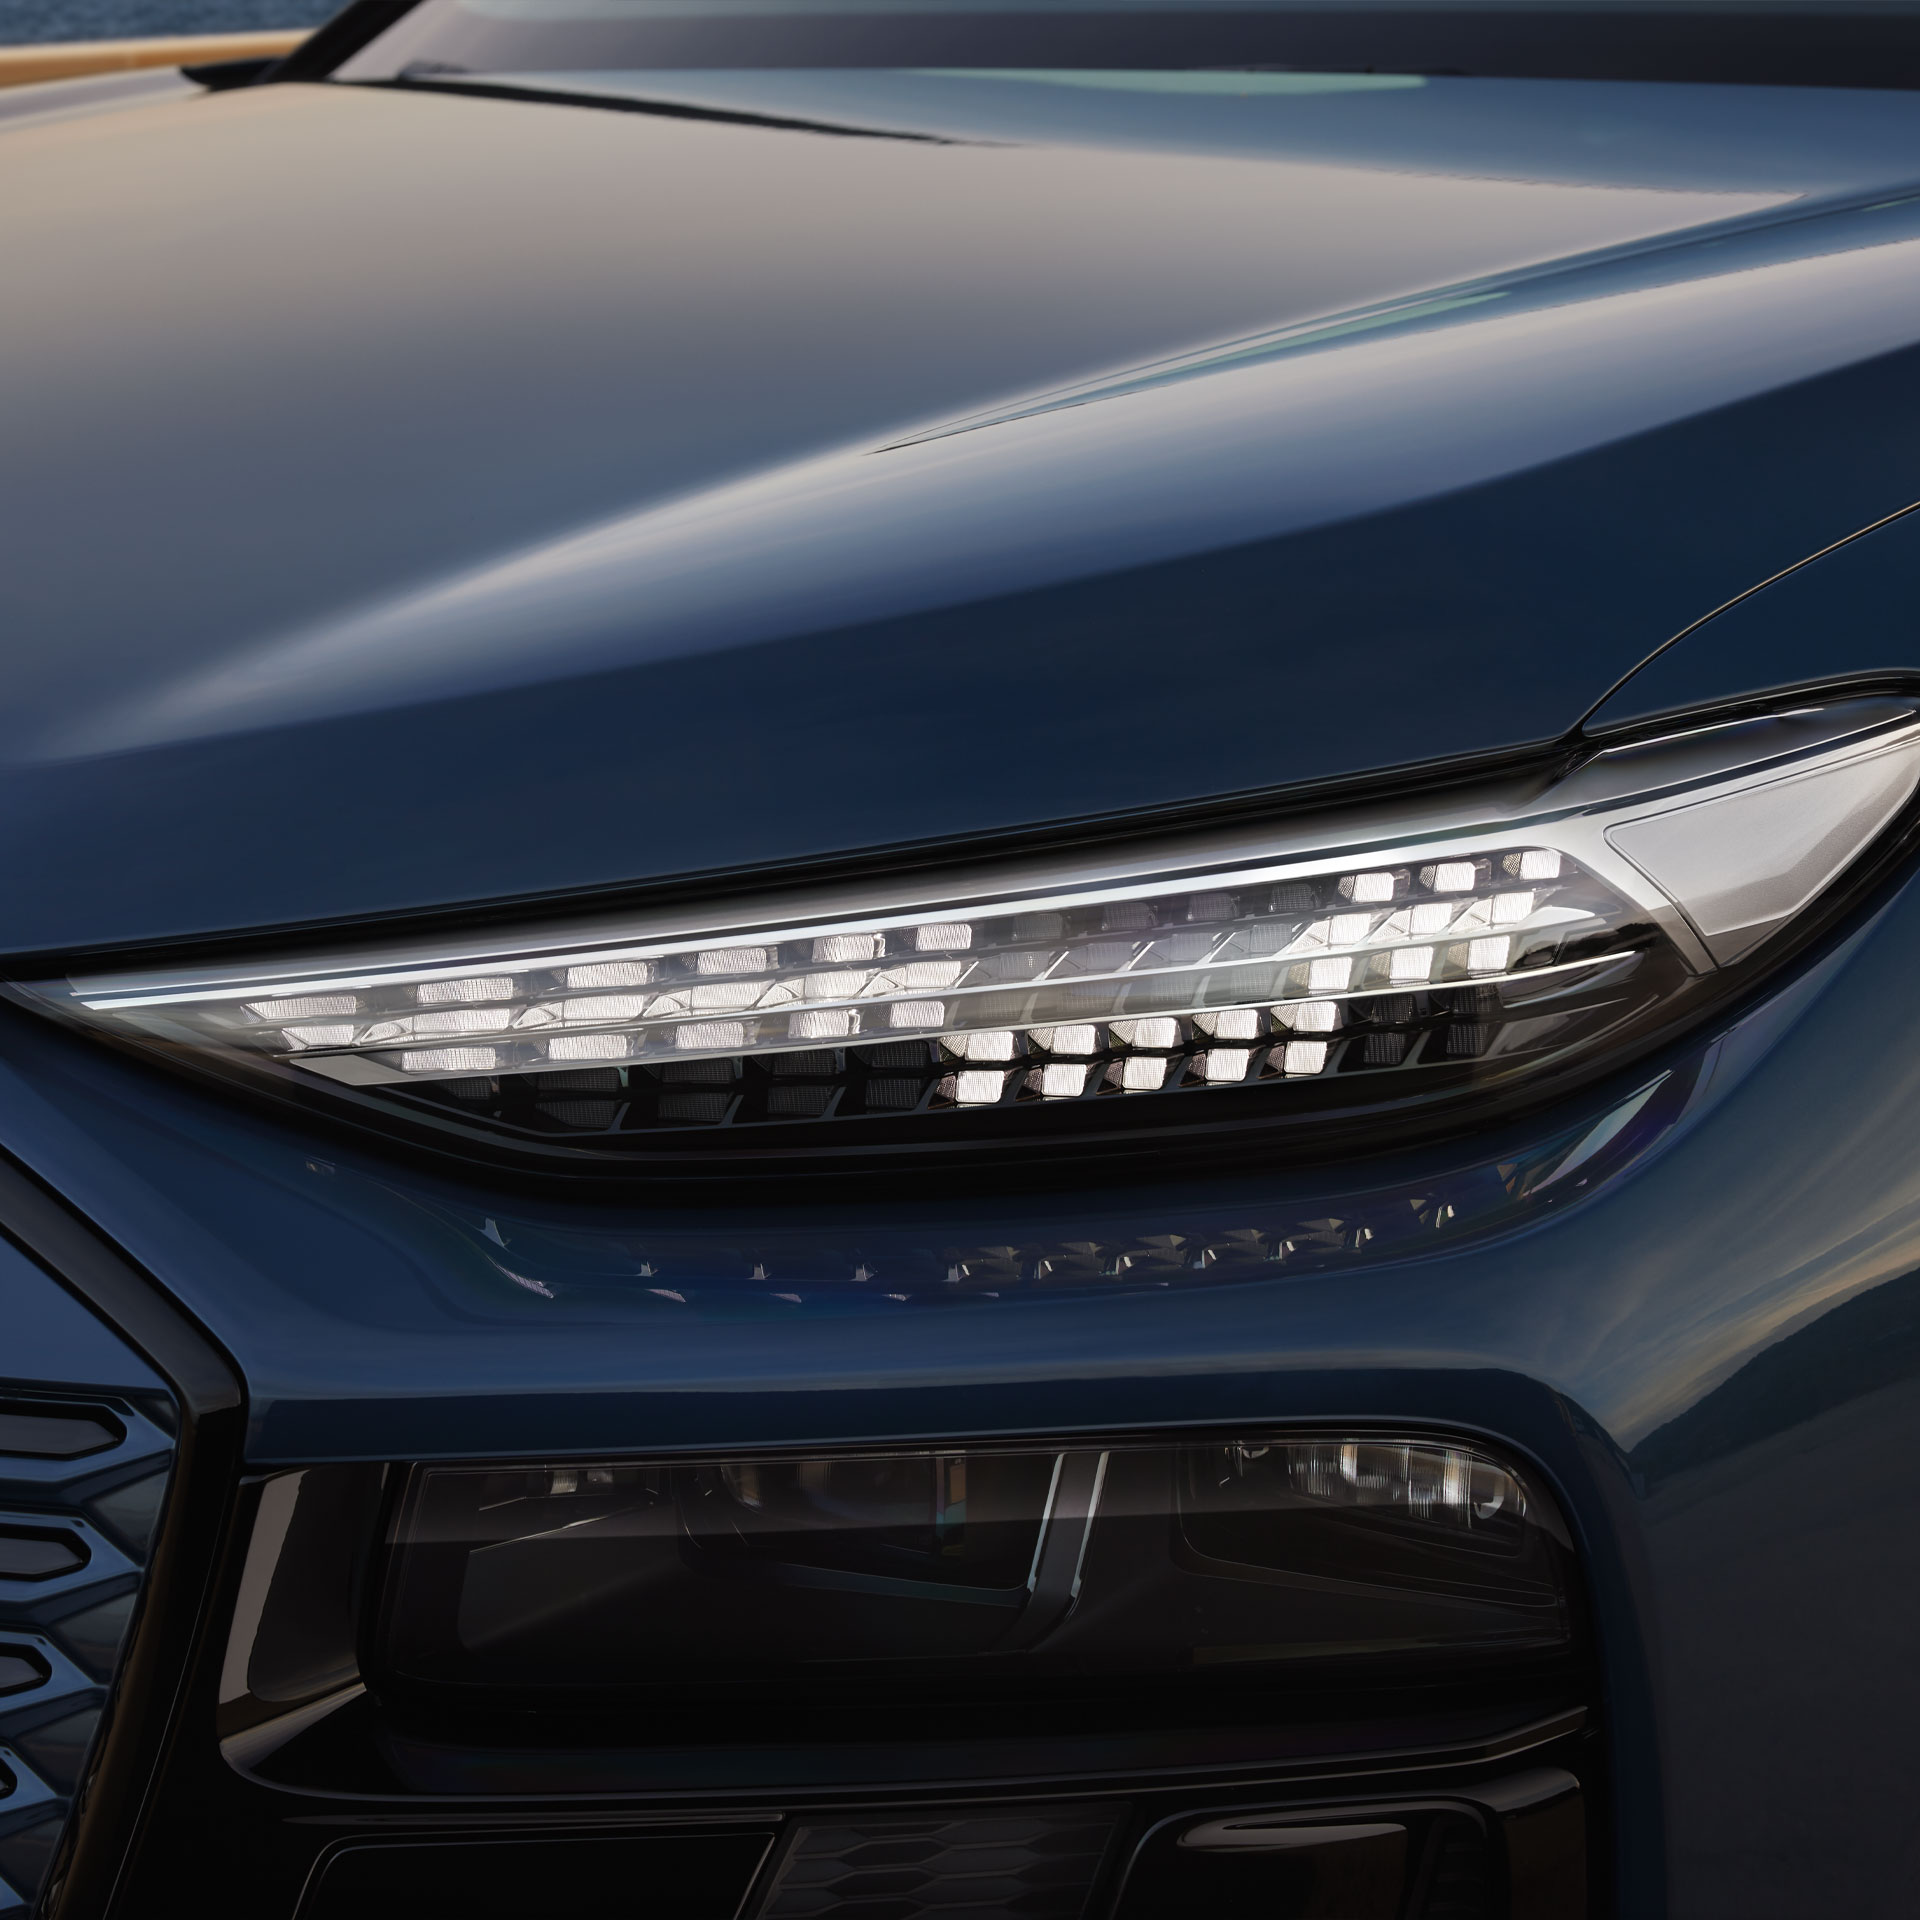 Close up on the front right headlight of the Audi Q6 e-tron.